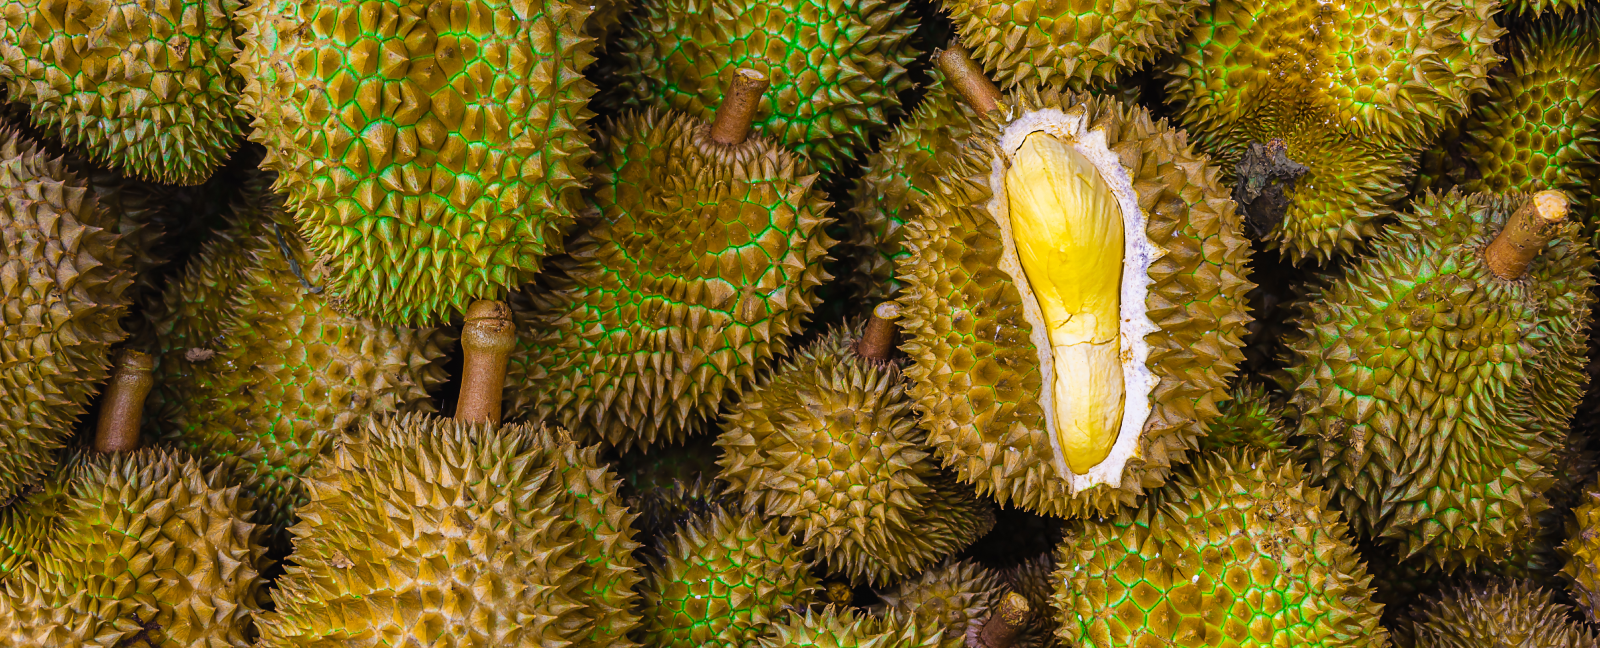 The Durian Story